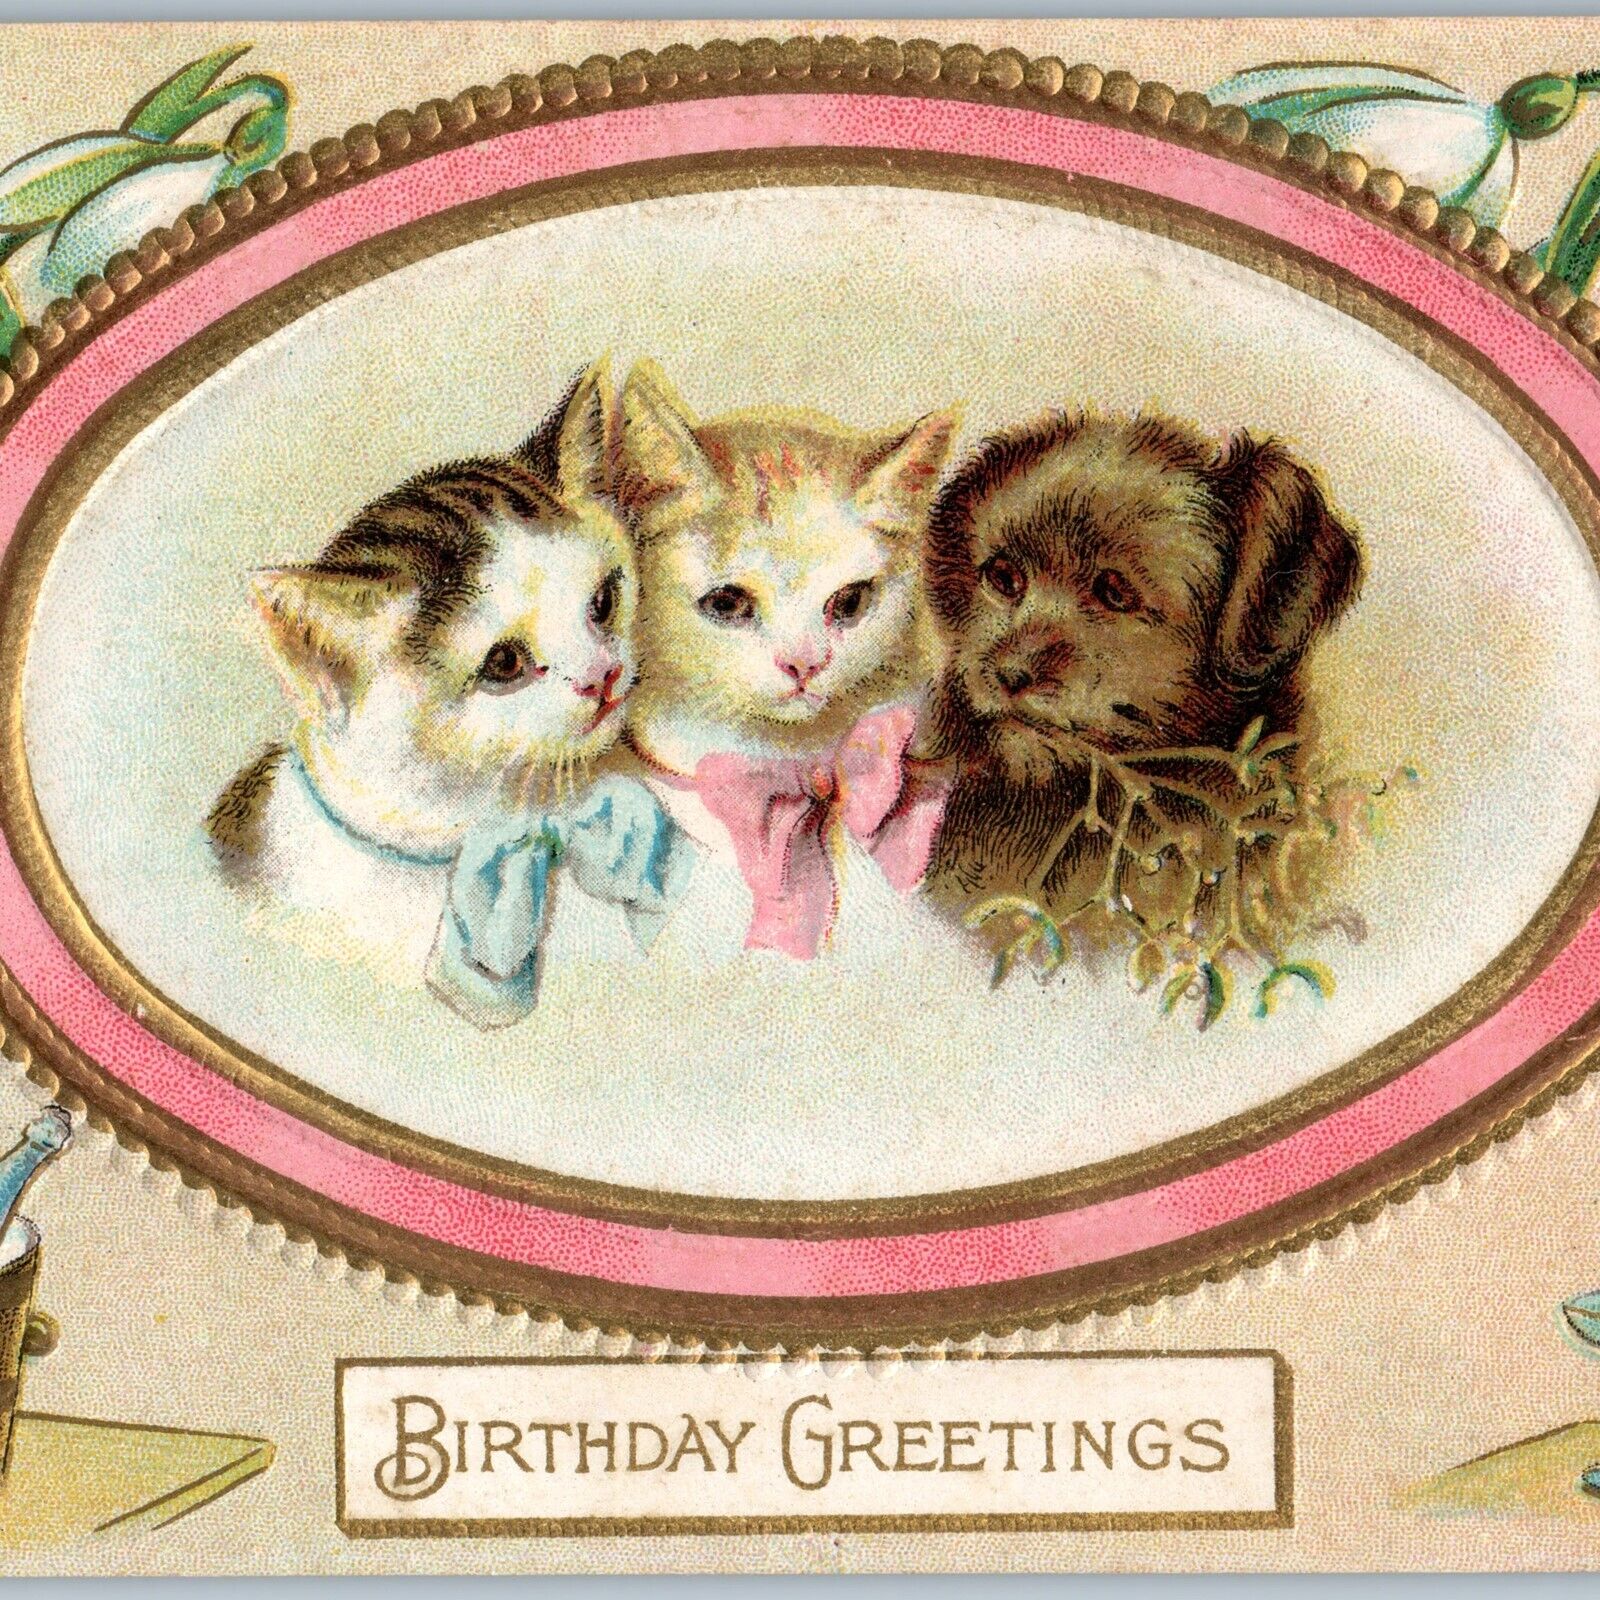 c1910s Adorable Kittens and Puppy Birthday Greetings Embossed Champaigne A190